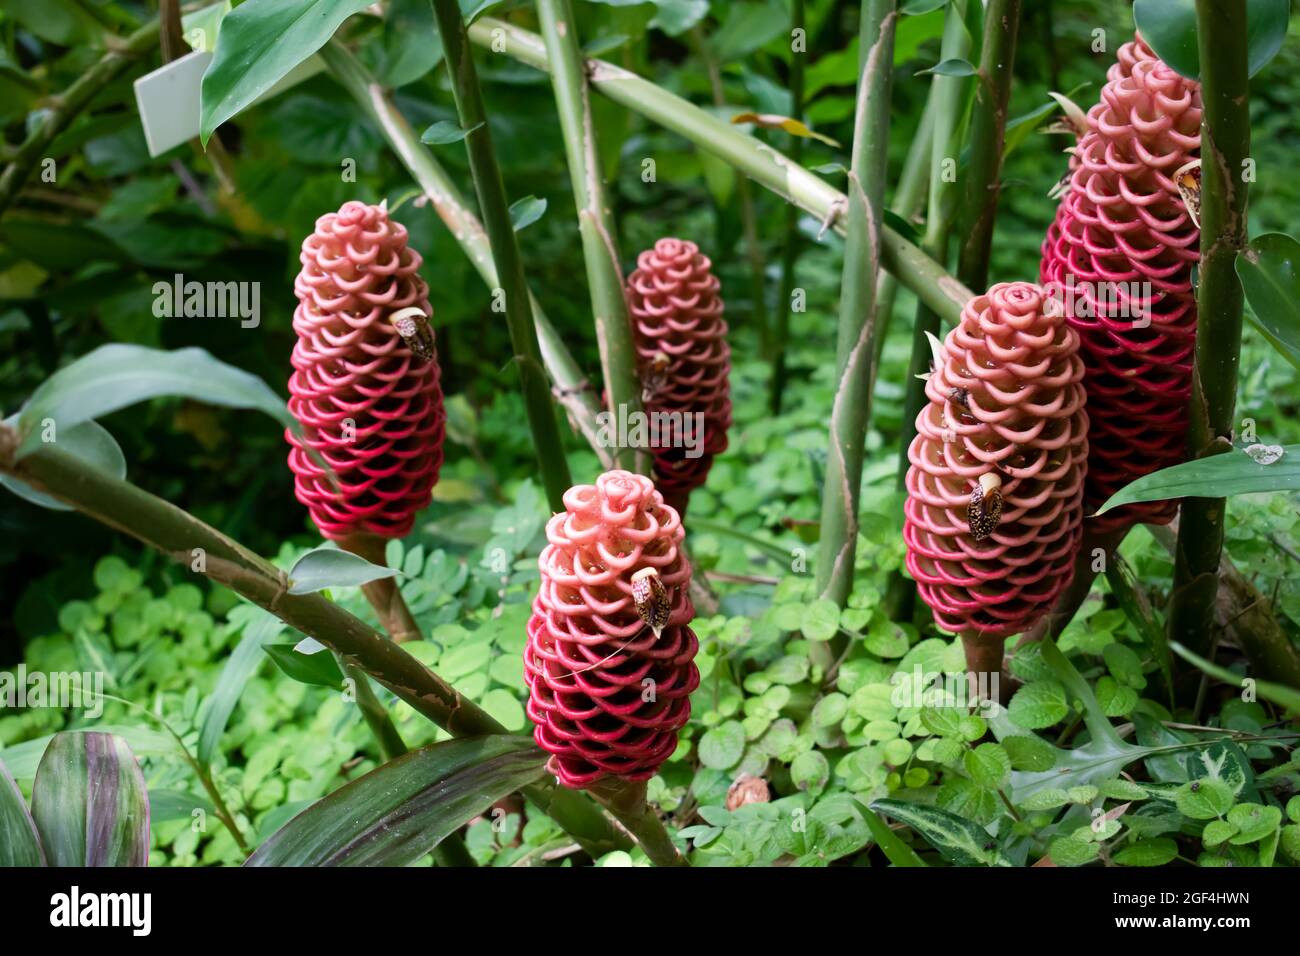 Beautiful red zingiber zerumbet plants or shampoo ginger growing in a botanical garden against a blurred, green nature background of stems and leaves Stock Photo